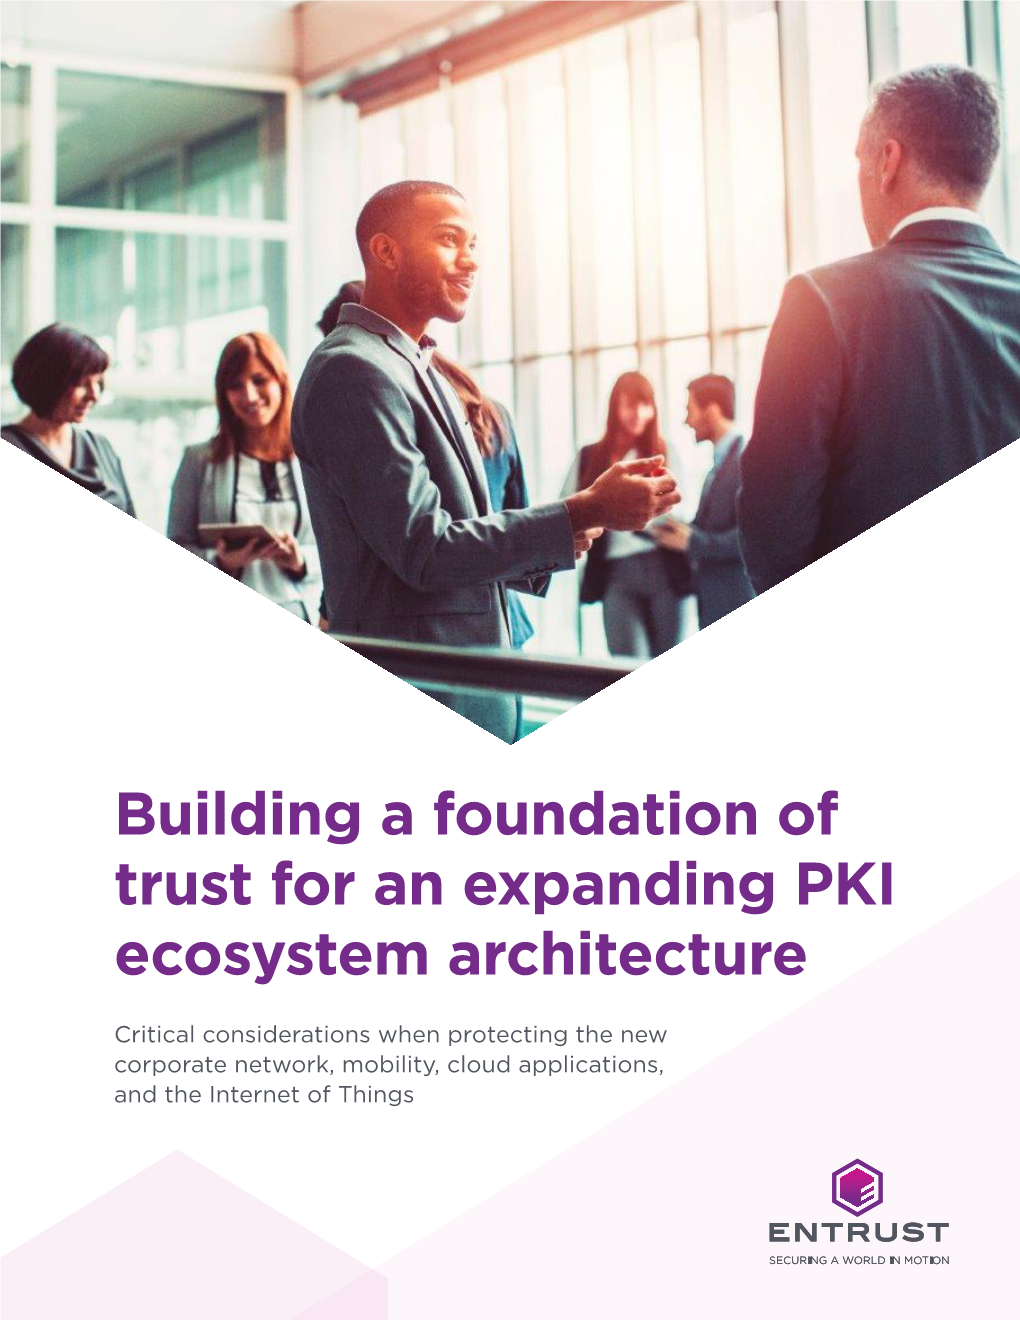 Building a Foundation of Trust for an Expanding PKI Ecosystem Architecture